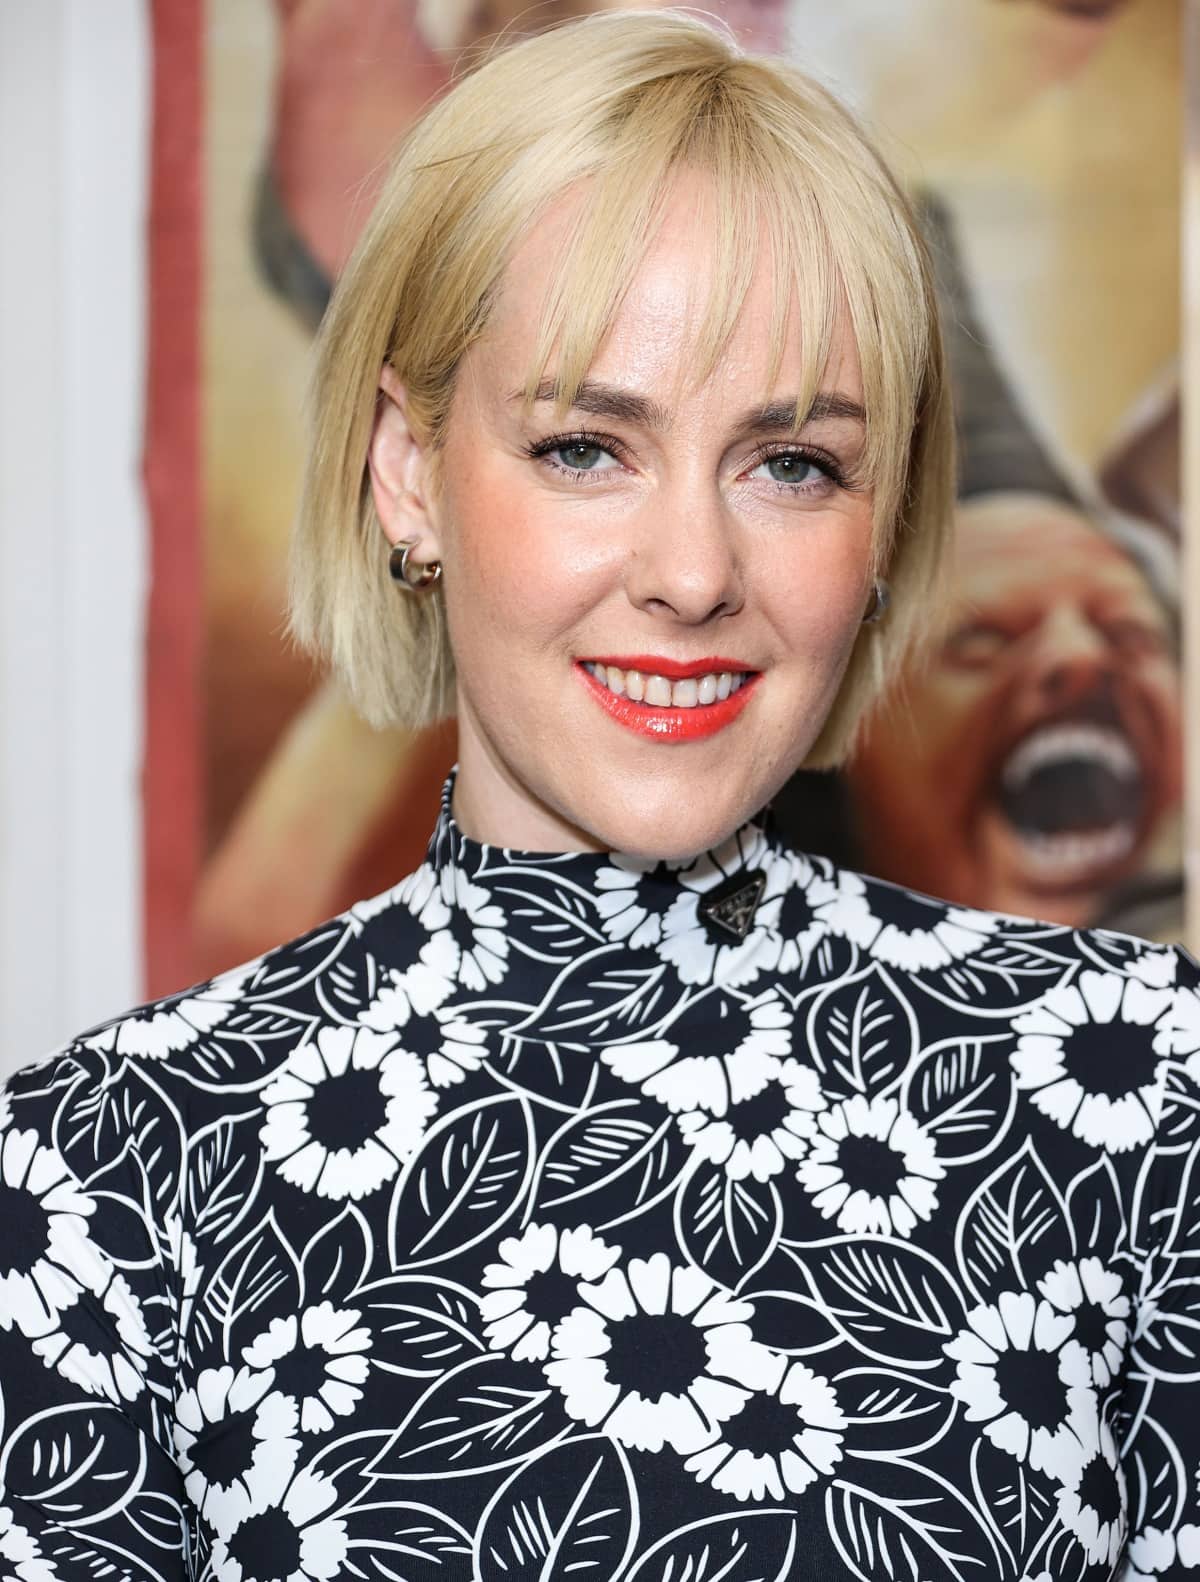 Jena Malone at the premiere of Vertical Entertainment’s Adopting Audrey